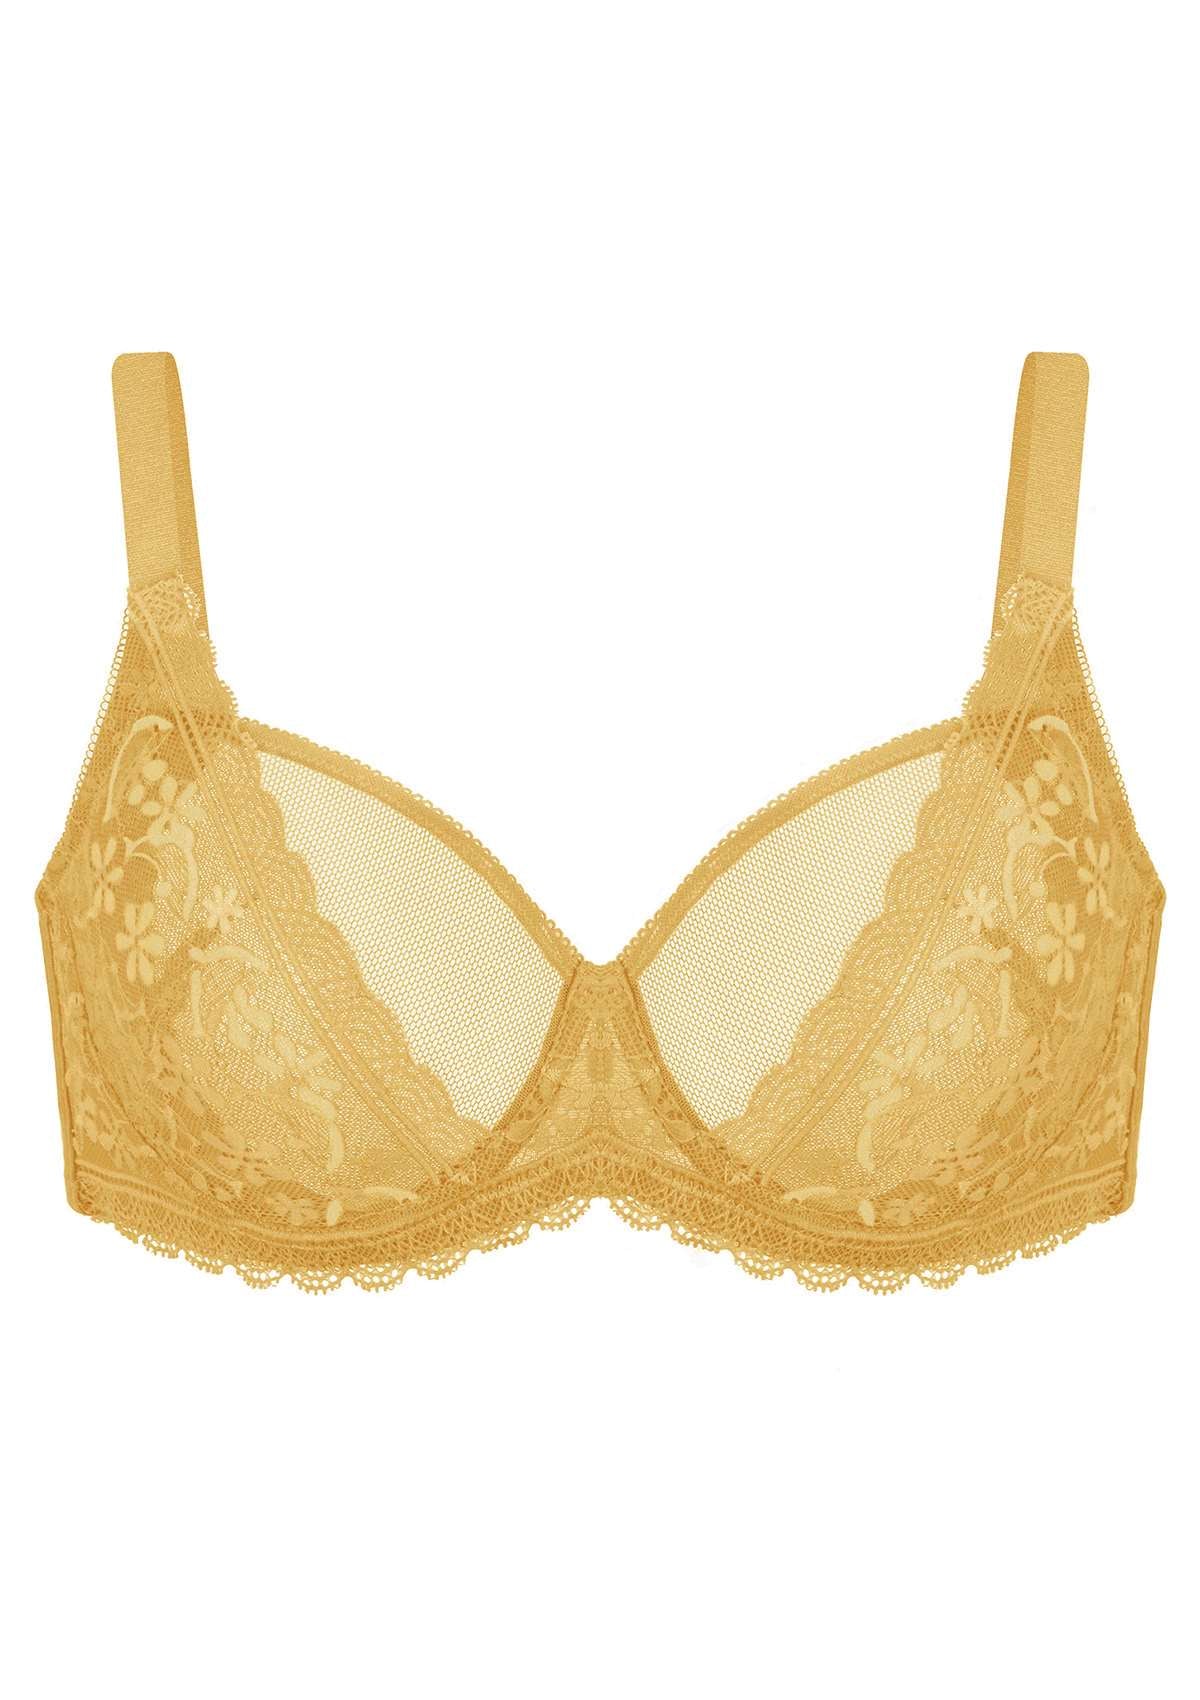 HSIA Anemone Lace Unlined Bra: Supportive, Lightweight Bra - Ginger / 42 / D